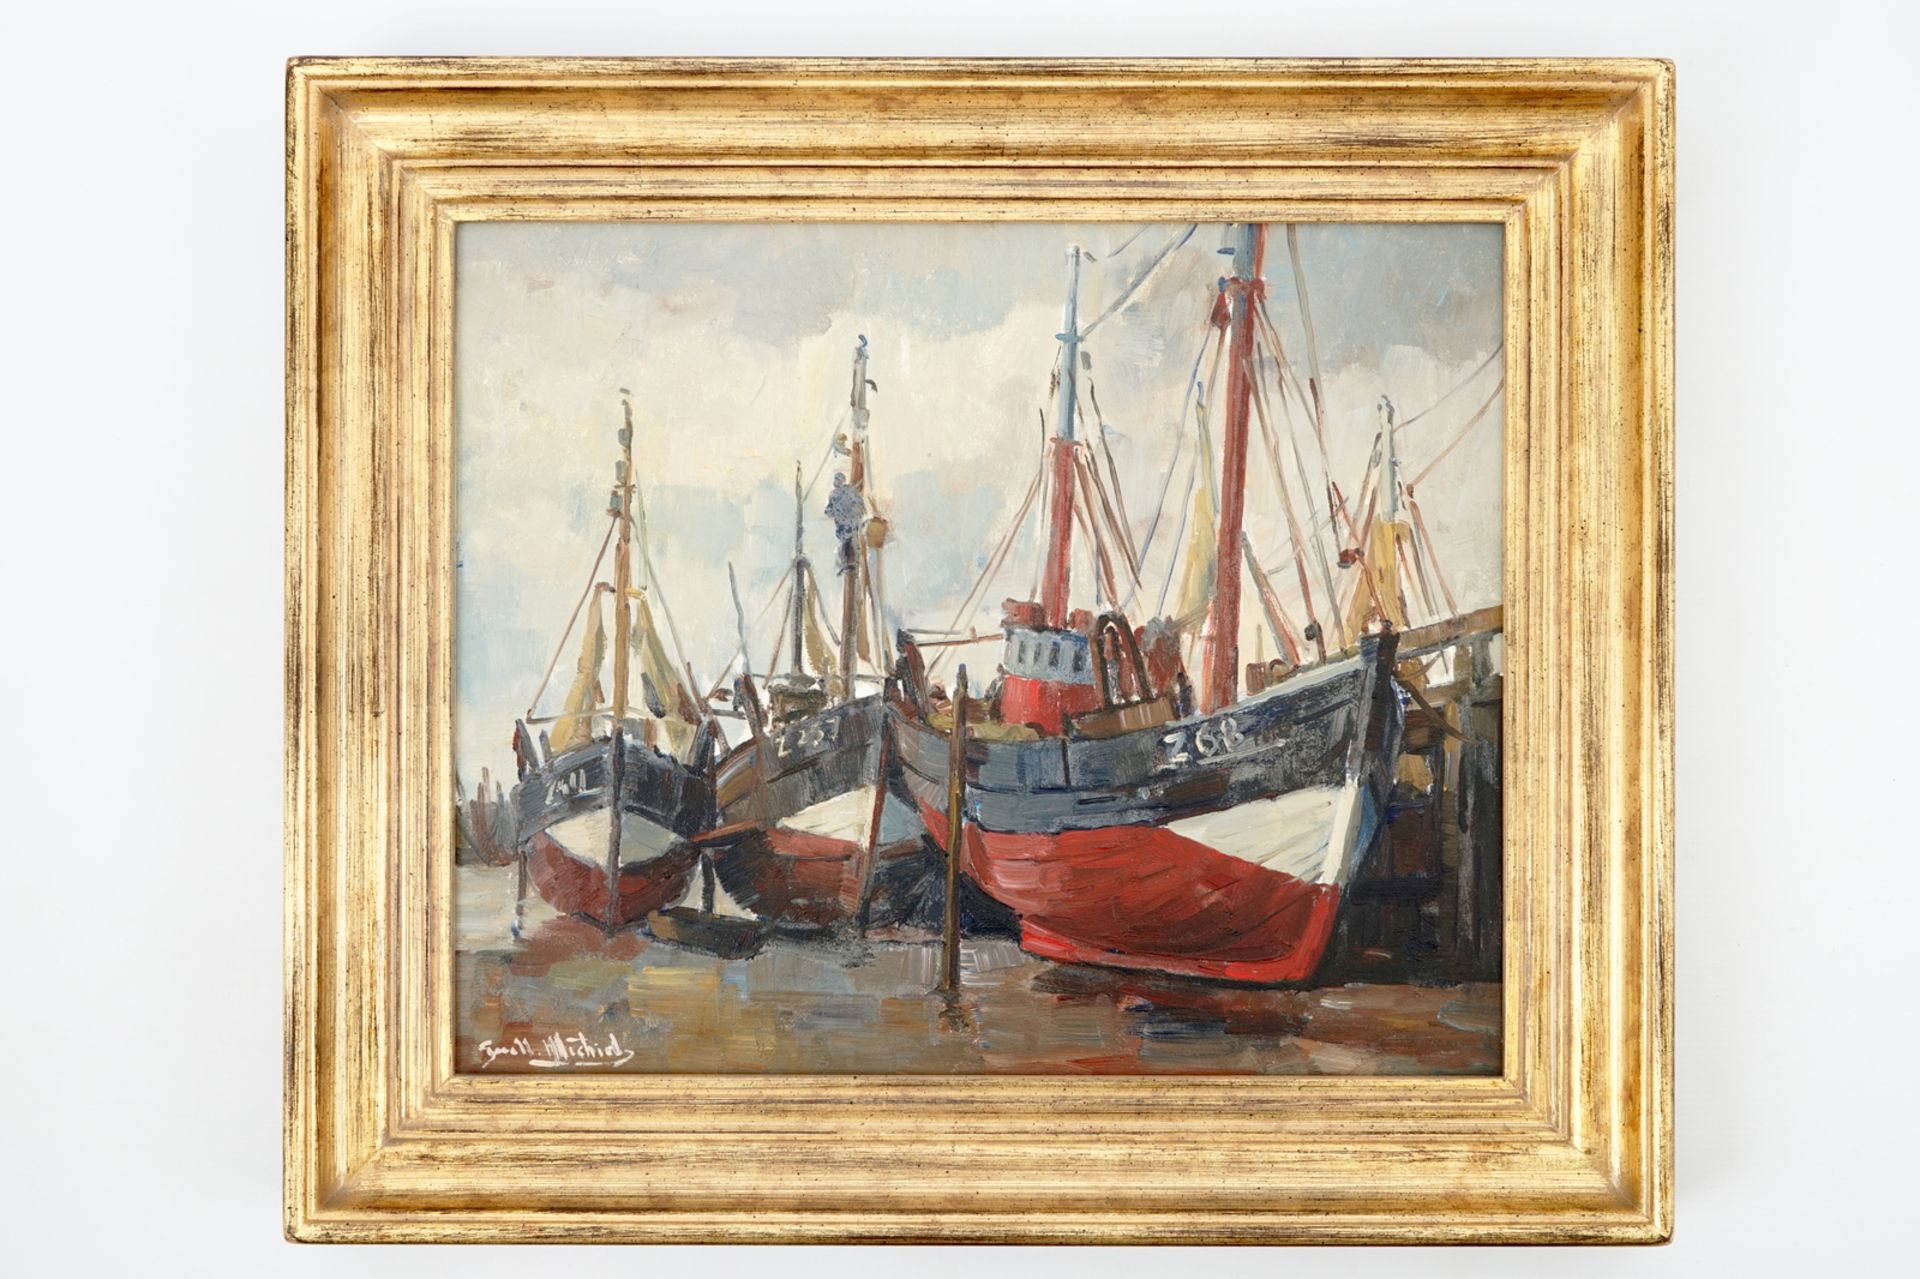 Guillaume Michiels (1909-1997), fishing boats at the Zeebrugge coast, oil on canvas Dim.: 58 cm x - Image 2 of 2